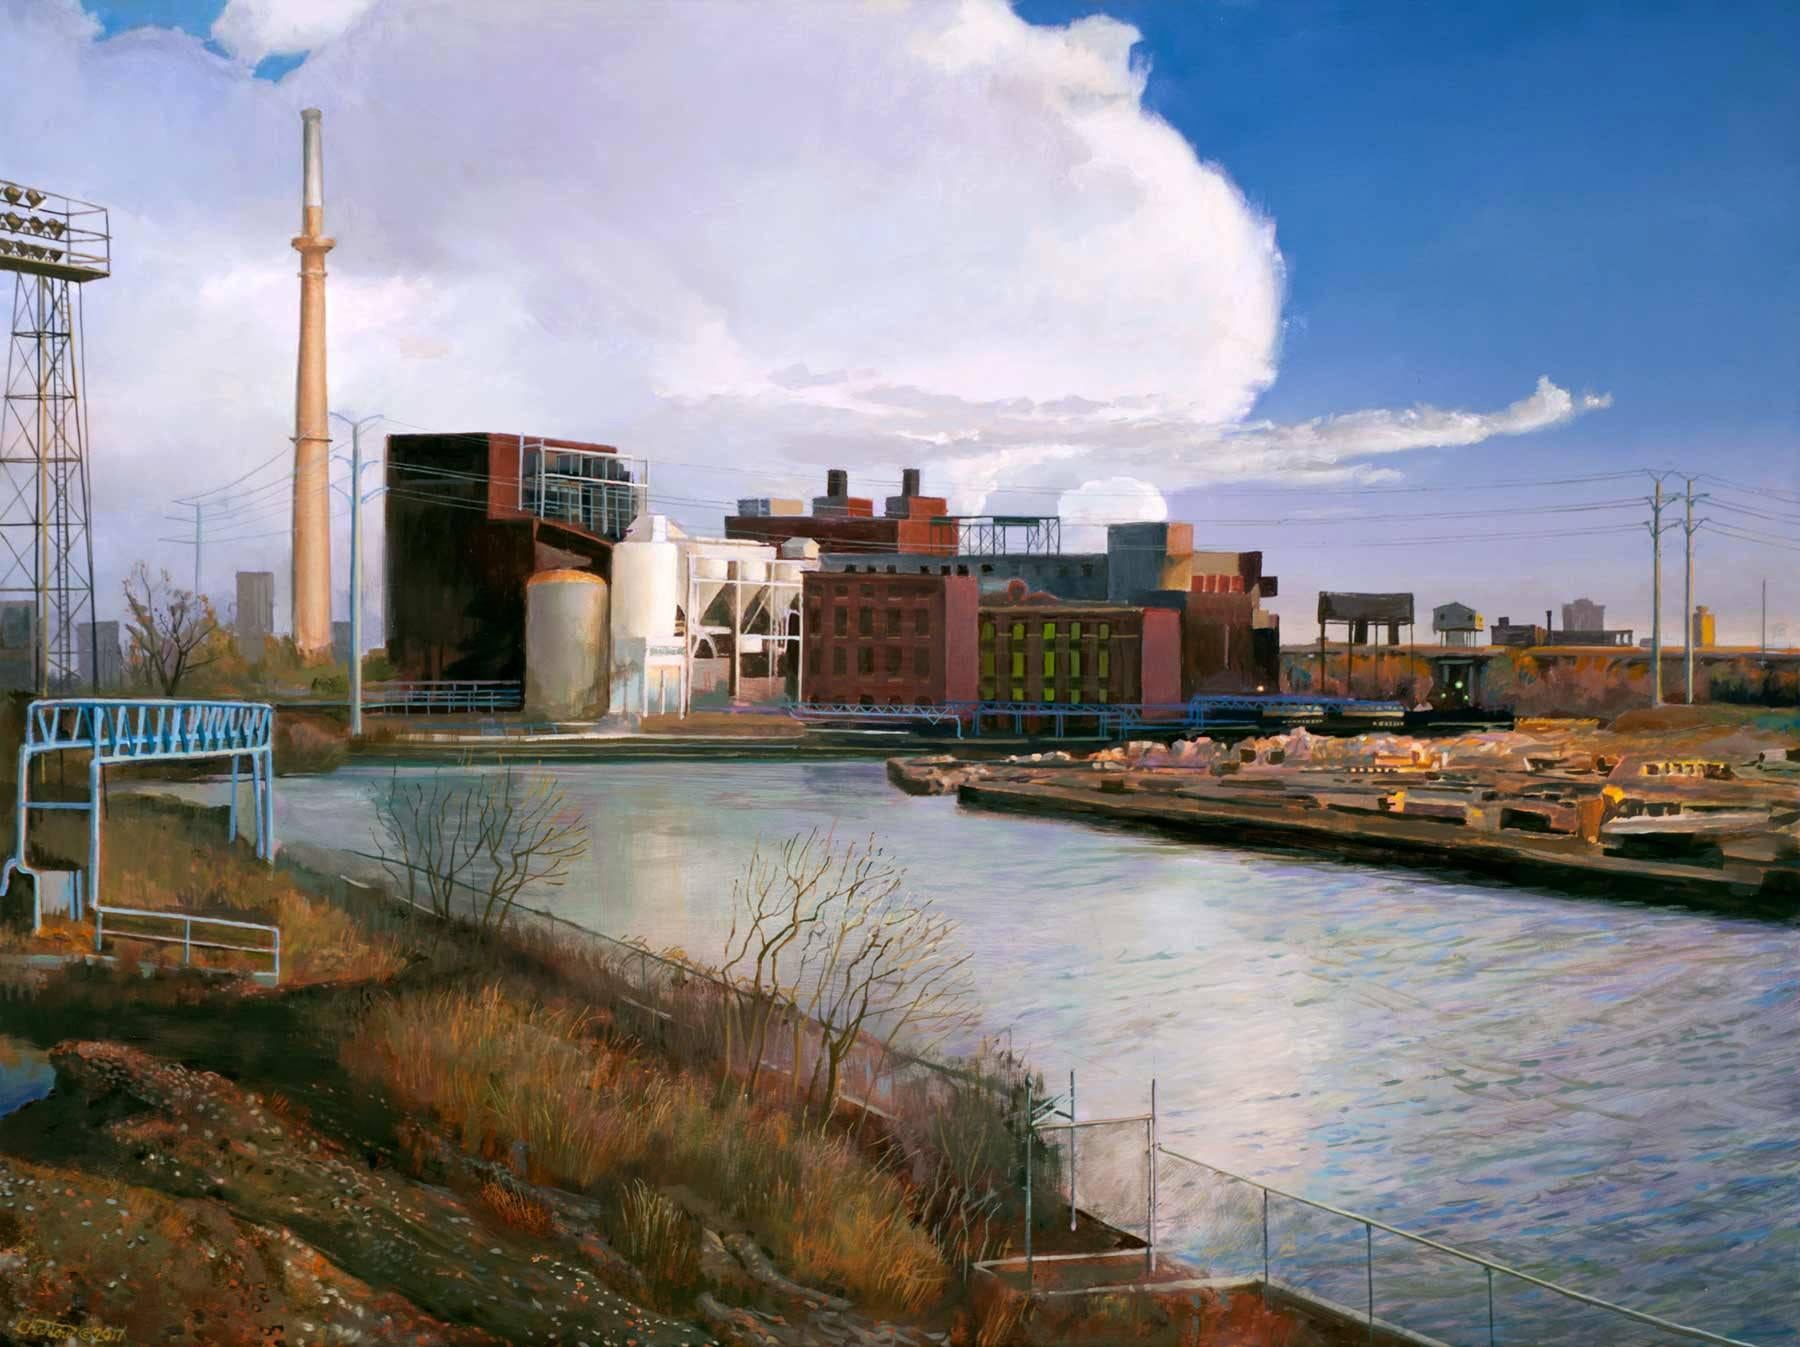 South Branch Chicago River - Original Oil Painting, River, Sky, Industrial Area